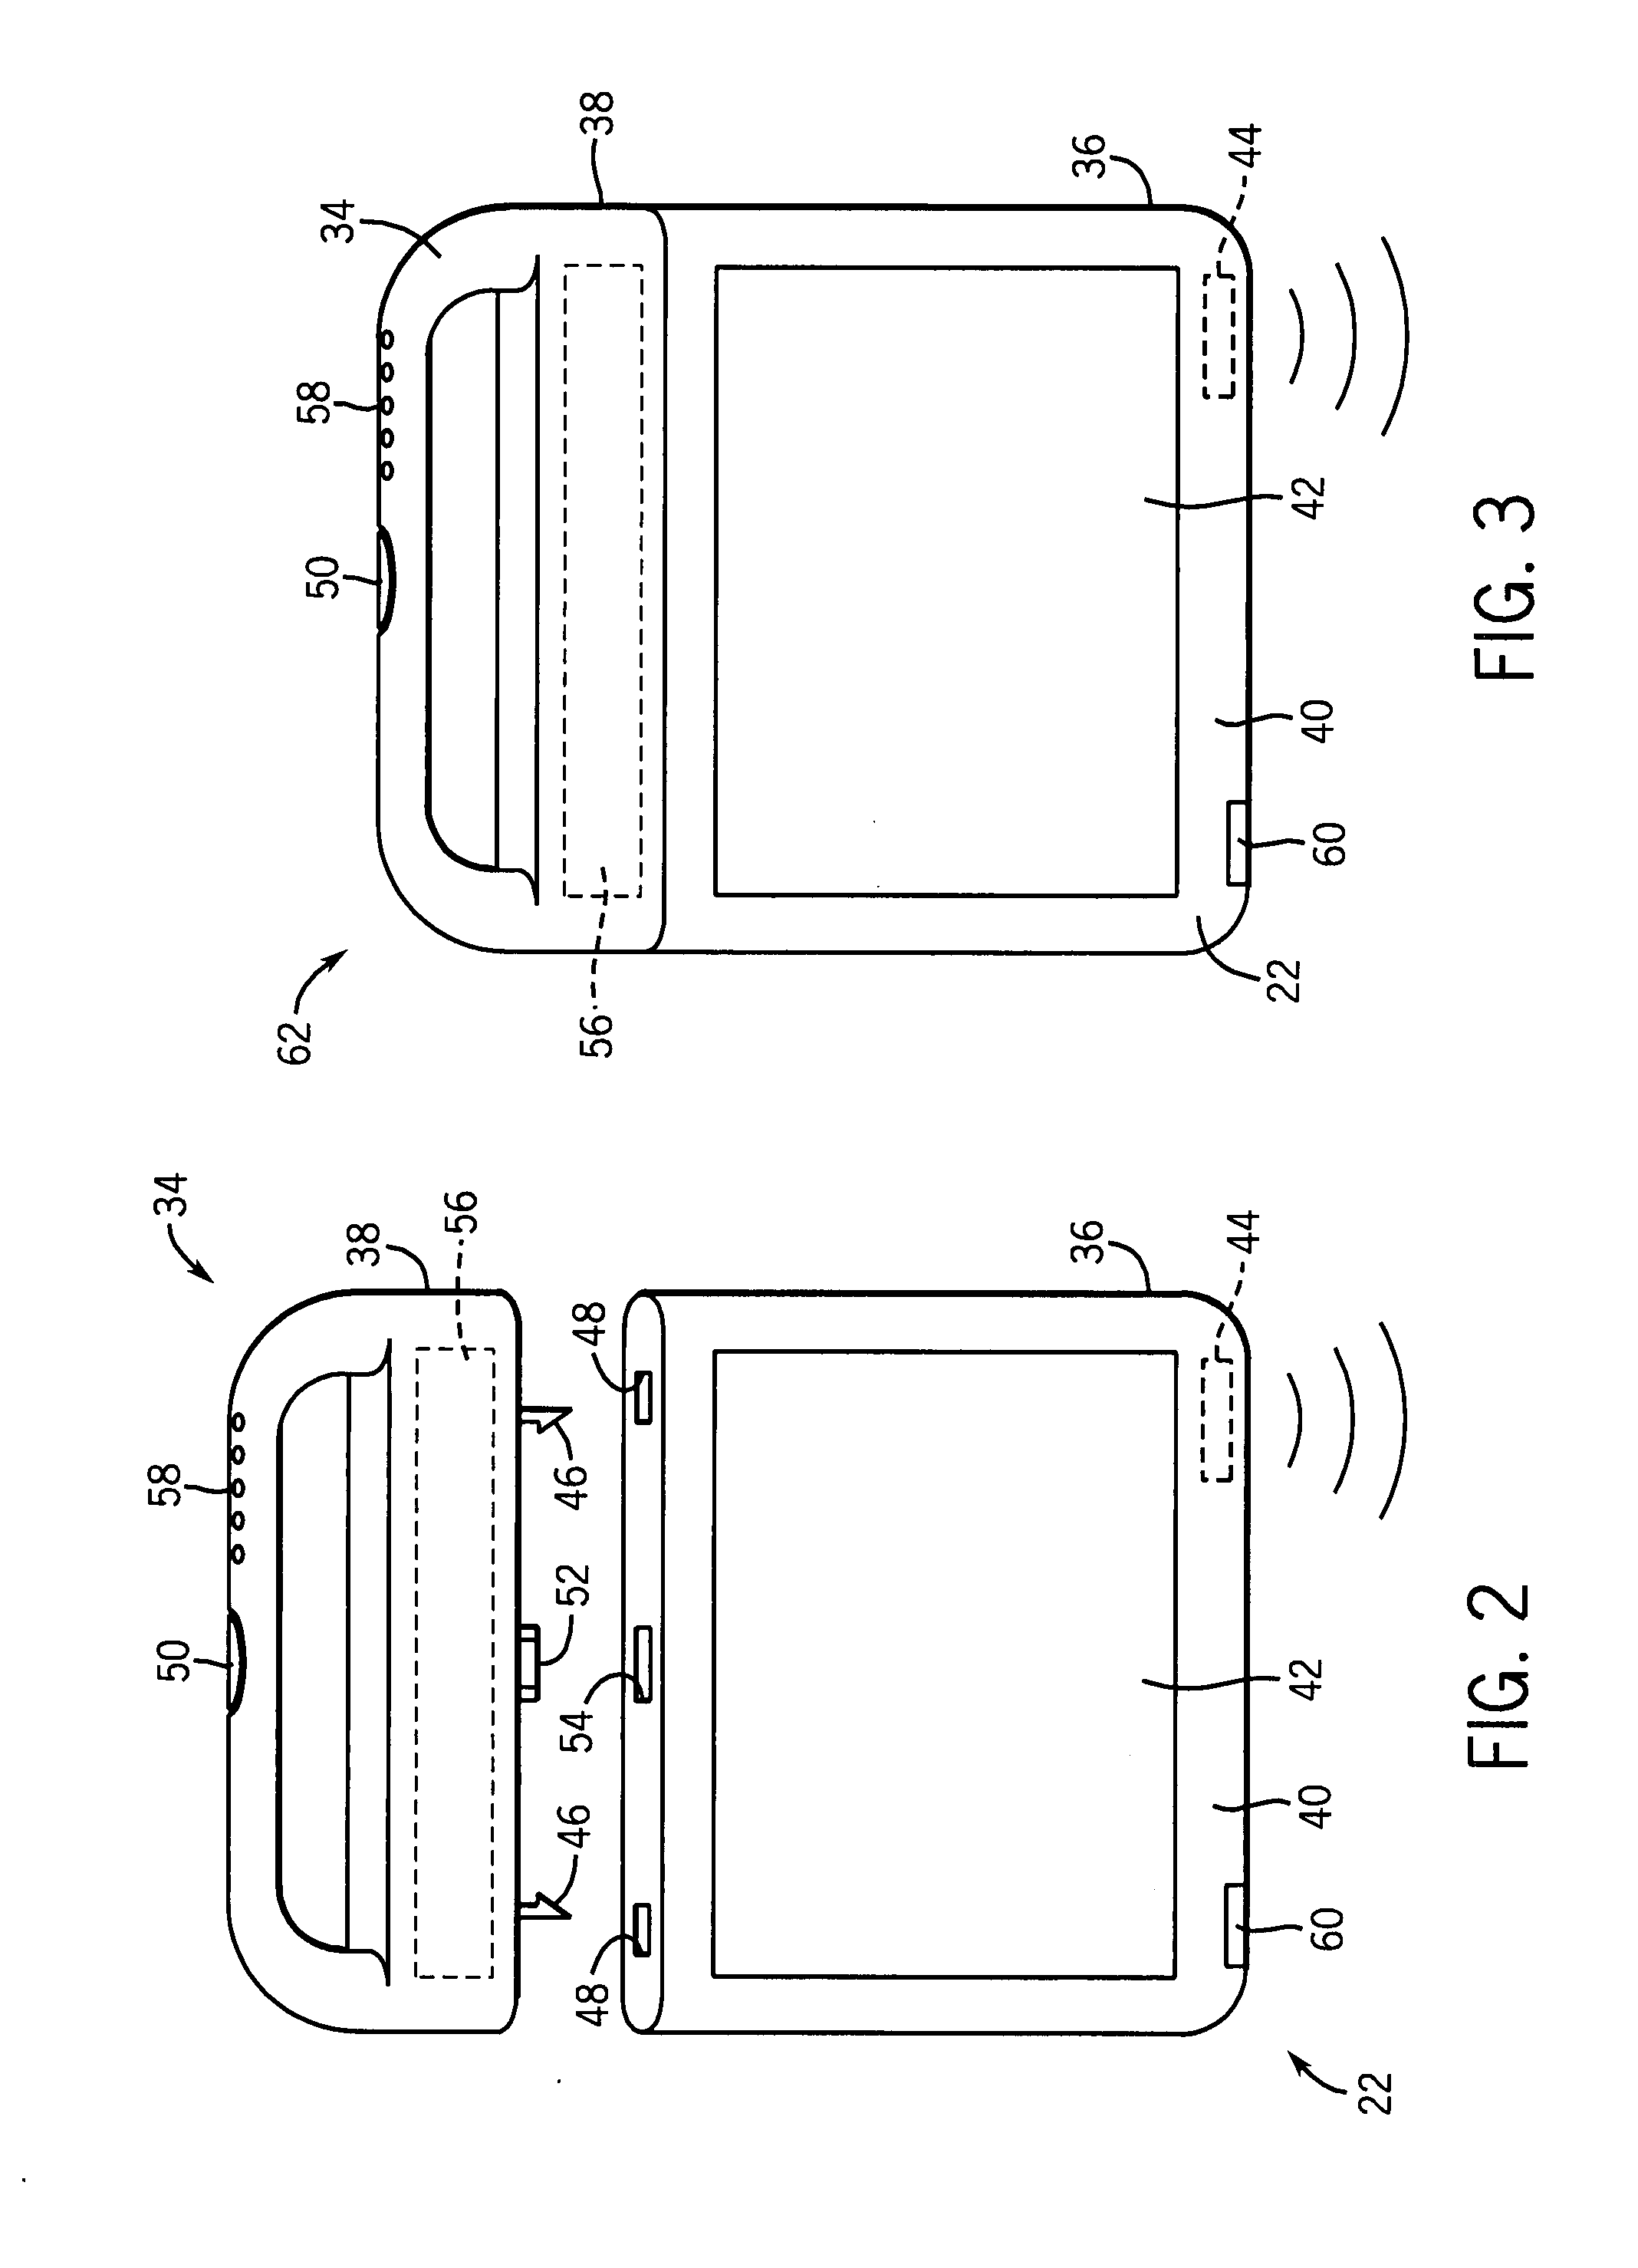 Wireless X-ray detector power system and method